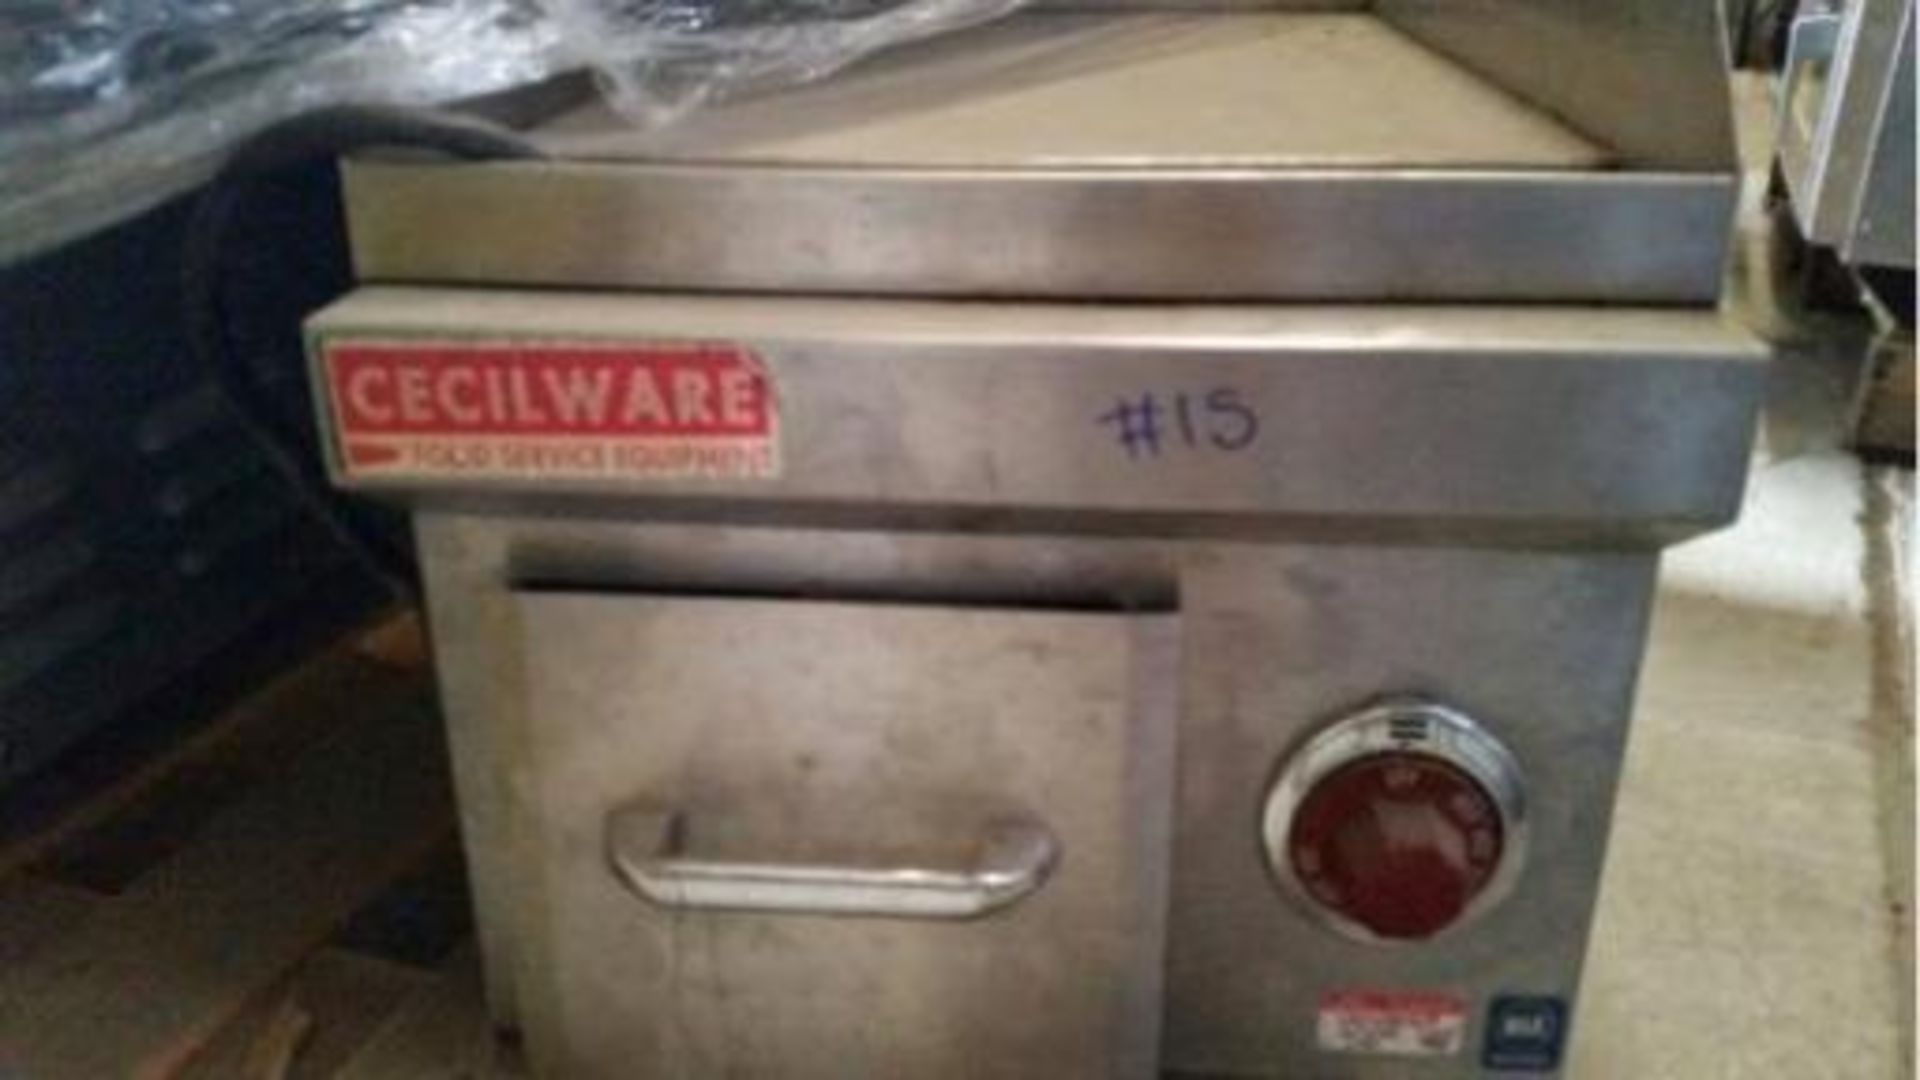 CecilWare electric stove/griddle, model M-E1T812, 1,120 volt, 1.1 KW (ET-26304) Located in Richland,